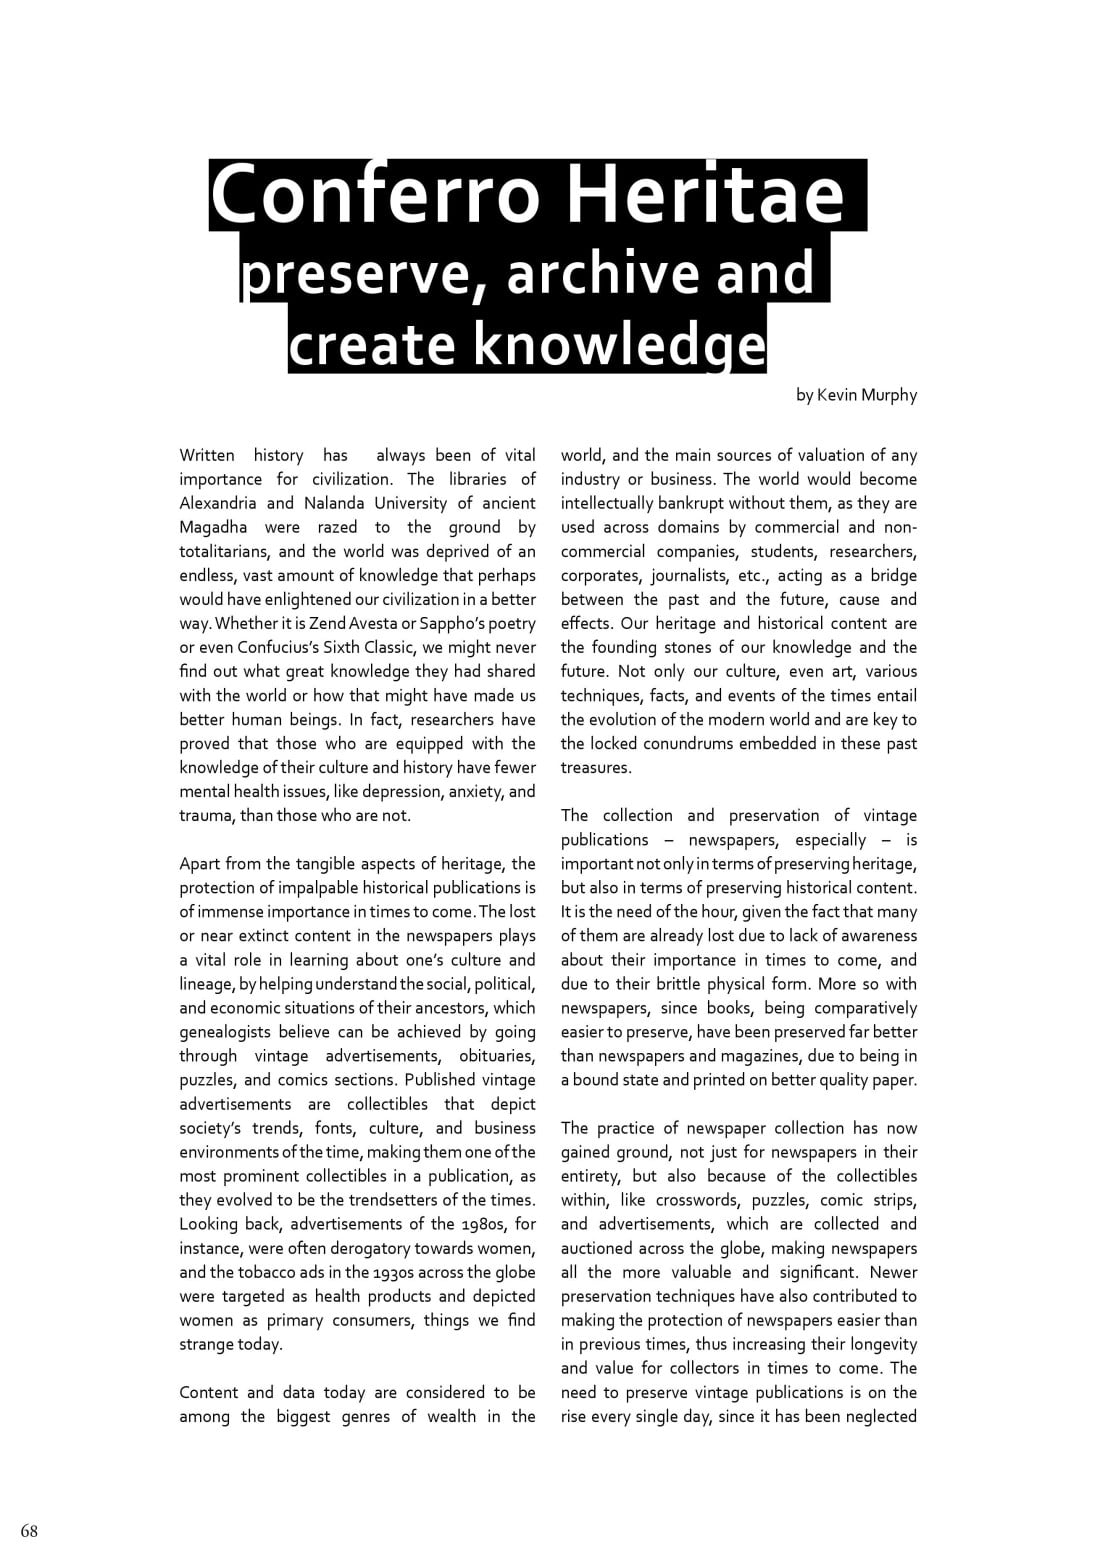 Preserve, Archive and Create Knowledge